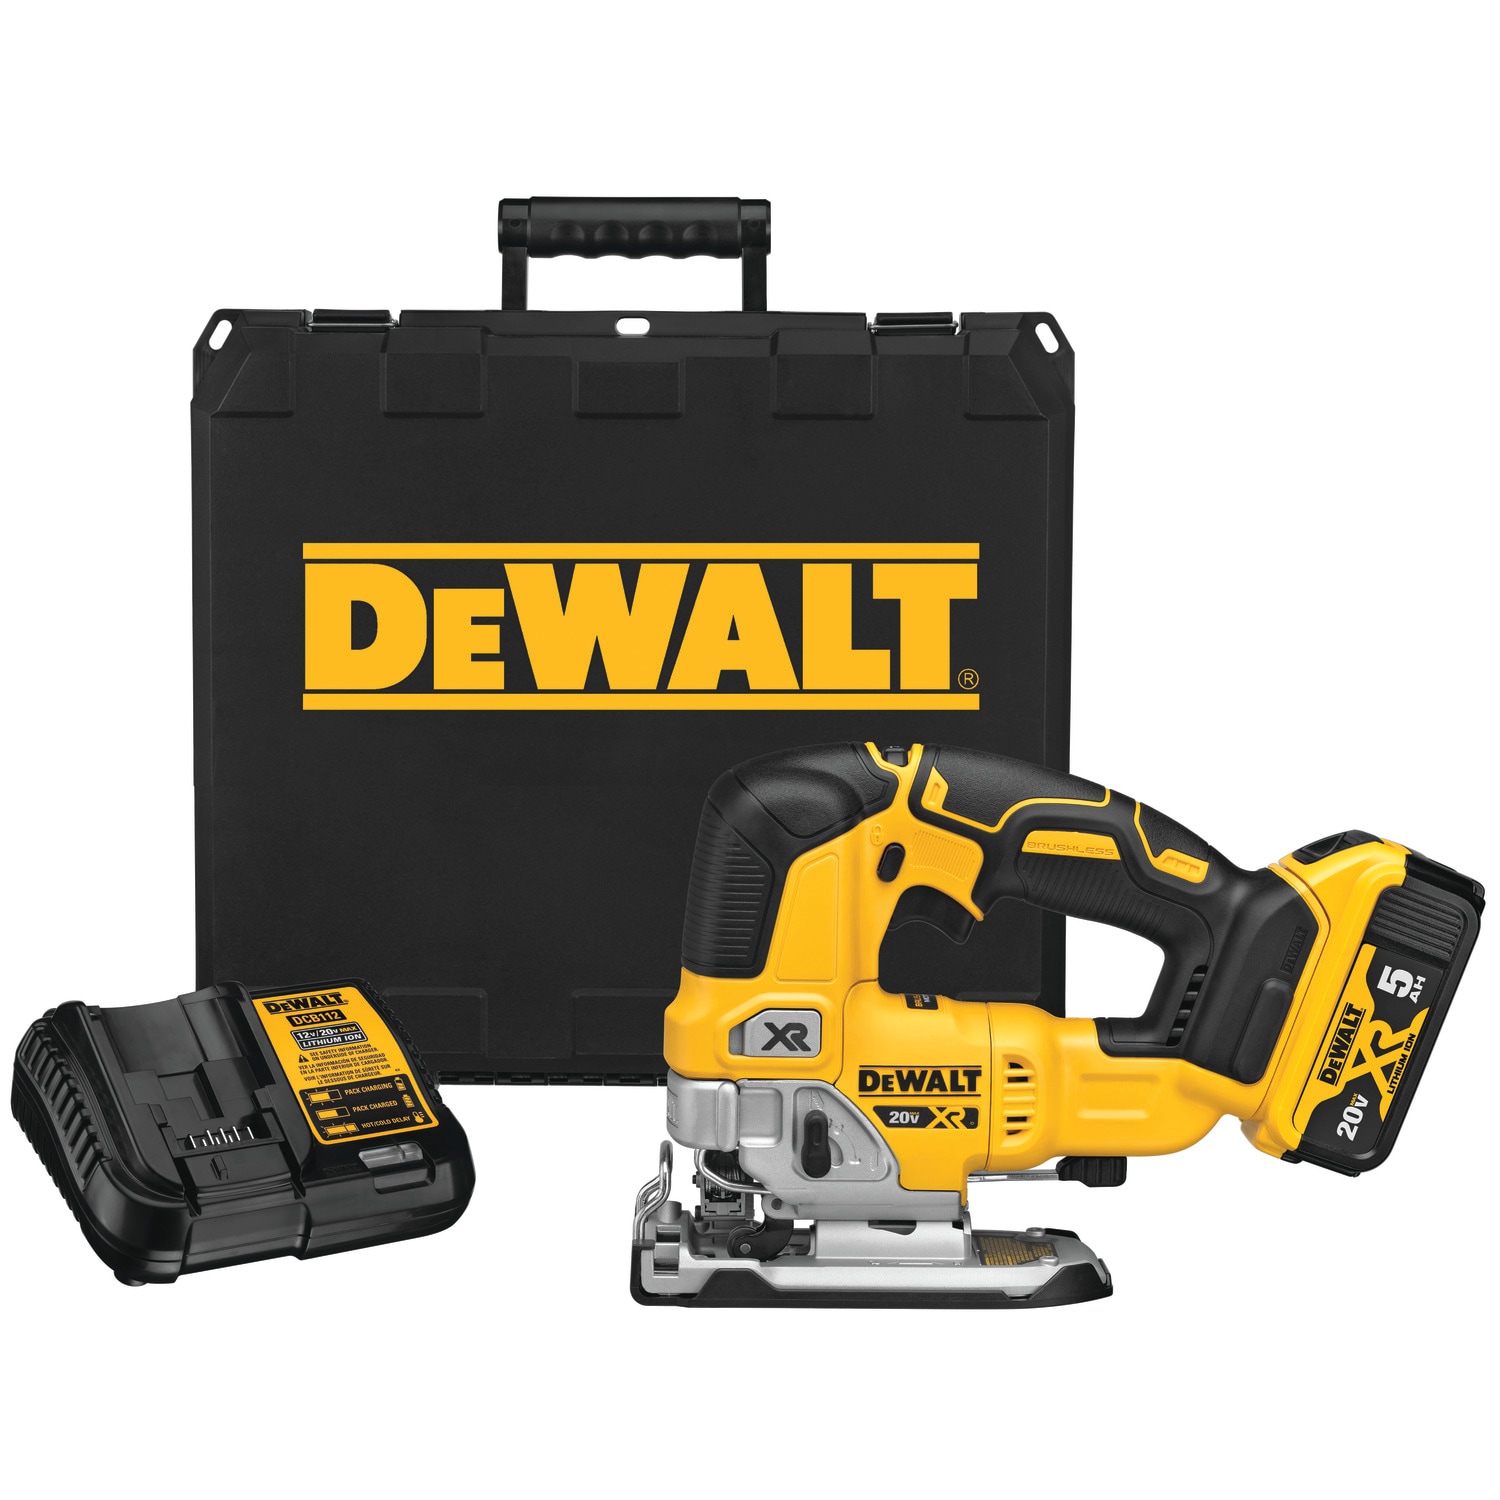 DEWALT XR 20-Volt Max Brushless Variable Speed Keyless Cordless Jigsaw (Charger Included and Battery Included) in Jigsaws department at Lowes.com